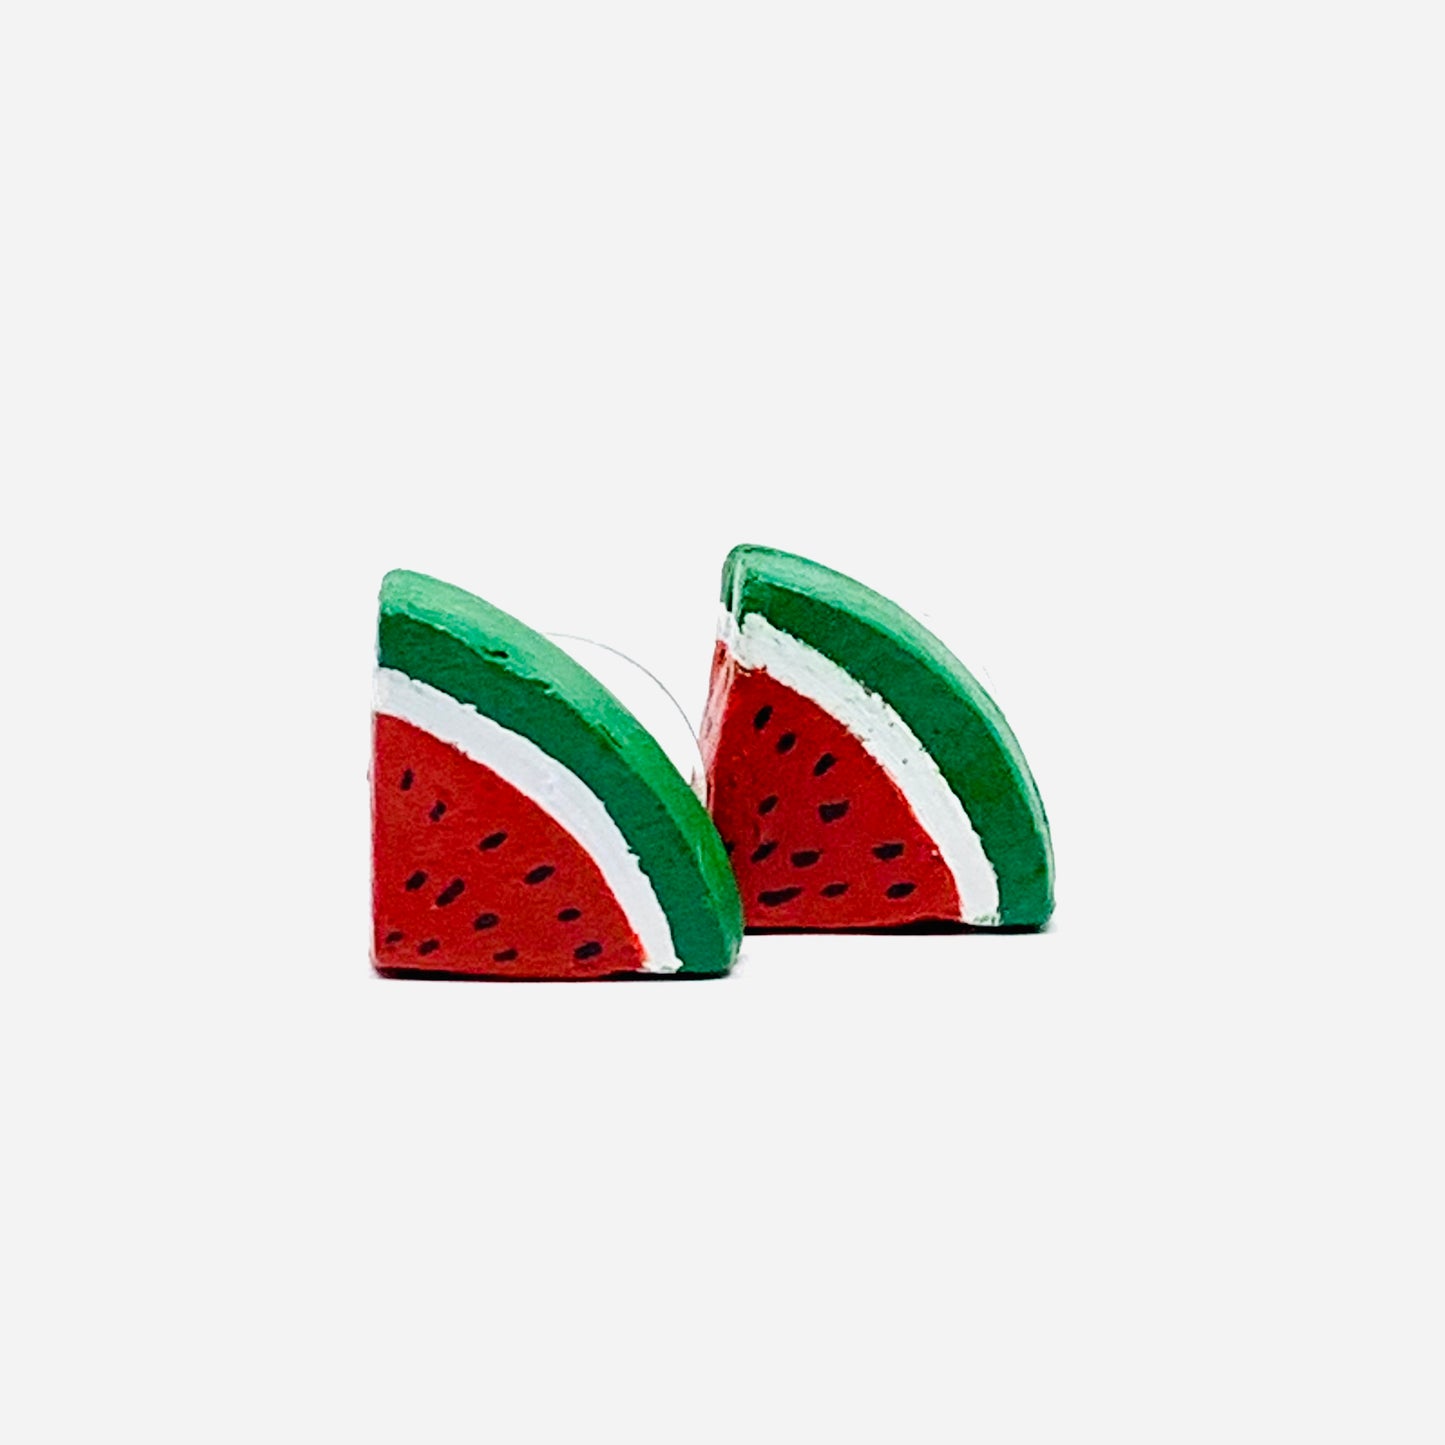 Hand painted watermelon clay earrings. Mexican food jewelry. Mexico folk art to wear. Summer and spring fashion for girls. Frida kahlo accessories by Fridamaniacs for Frida lovers